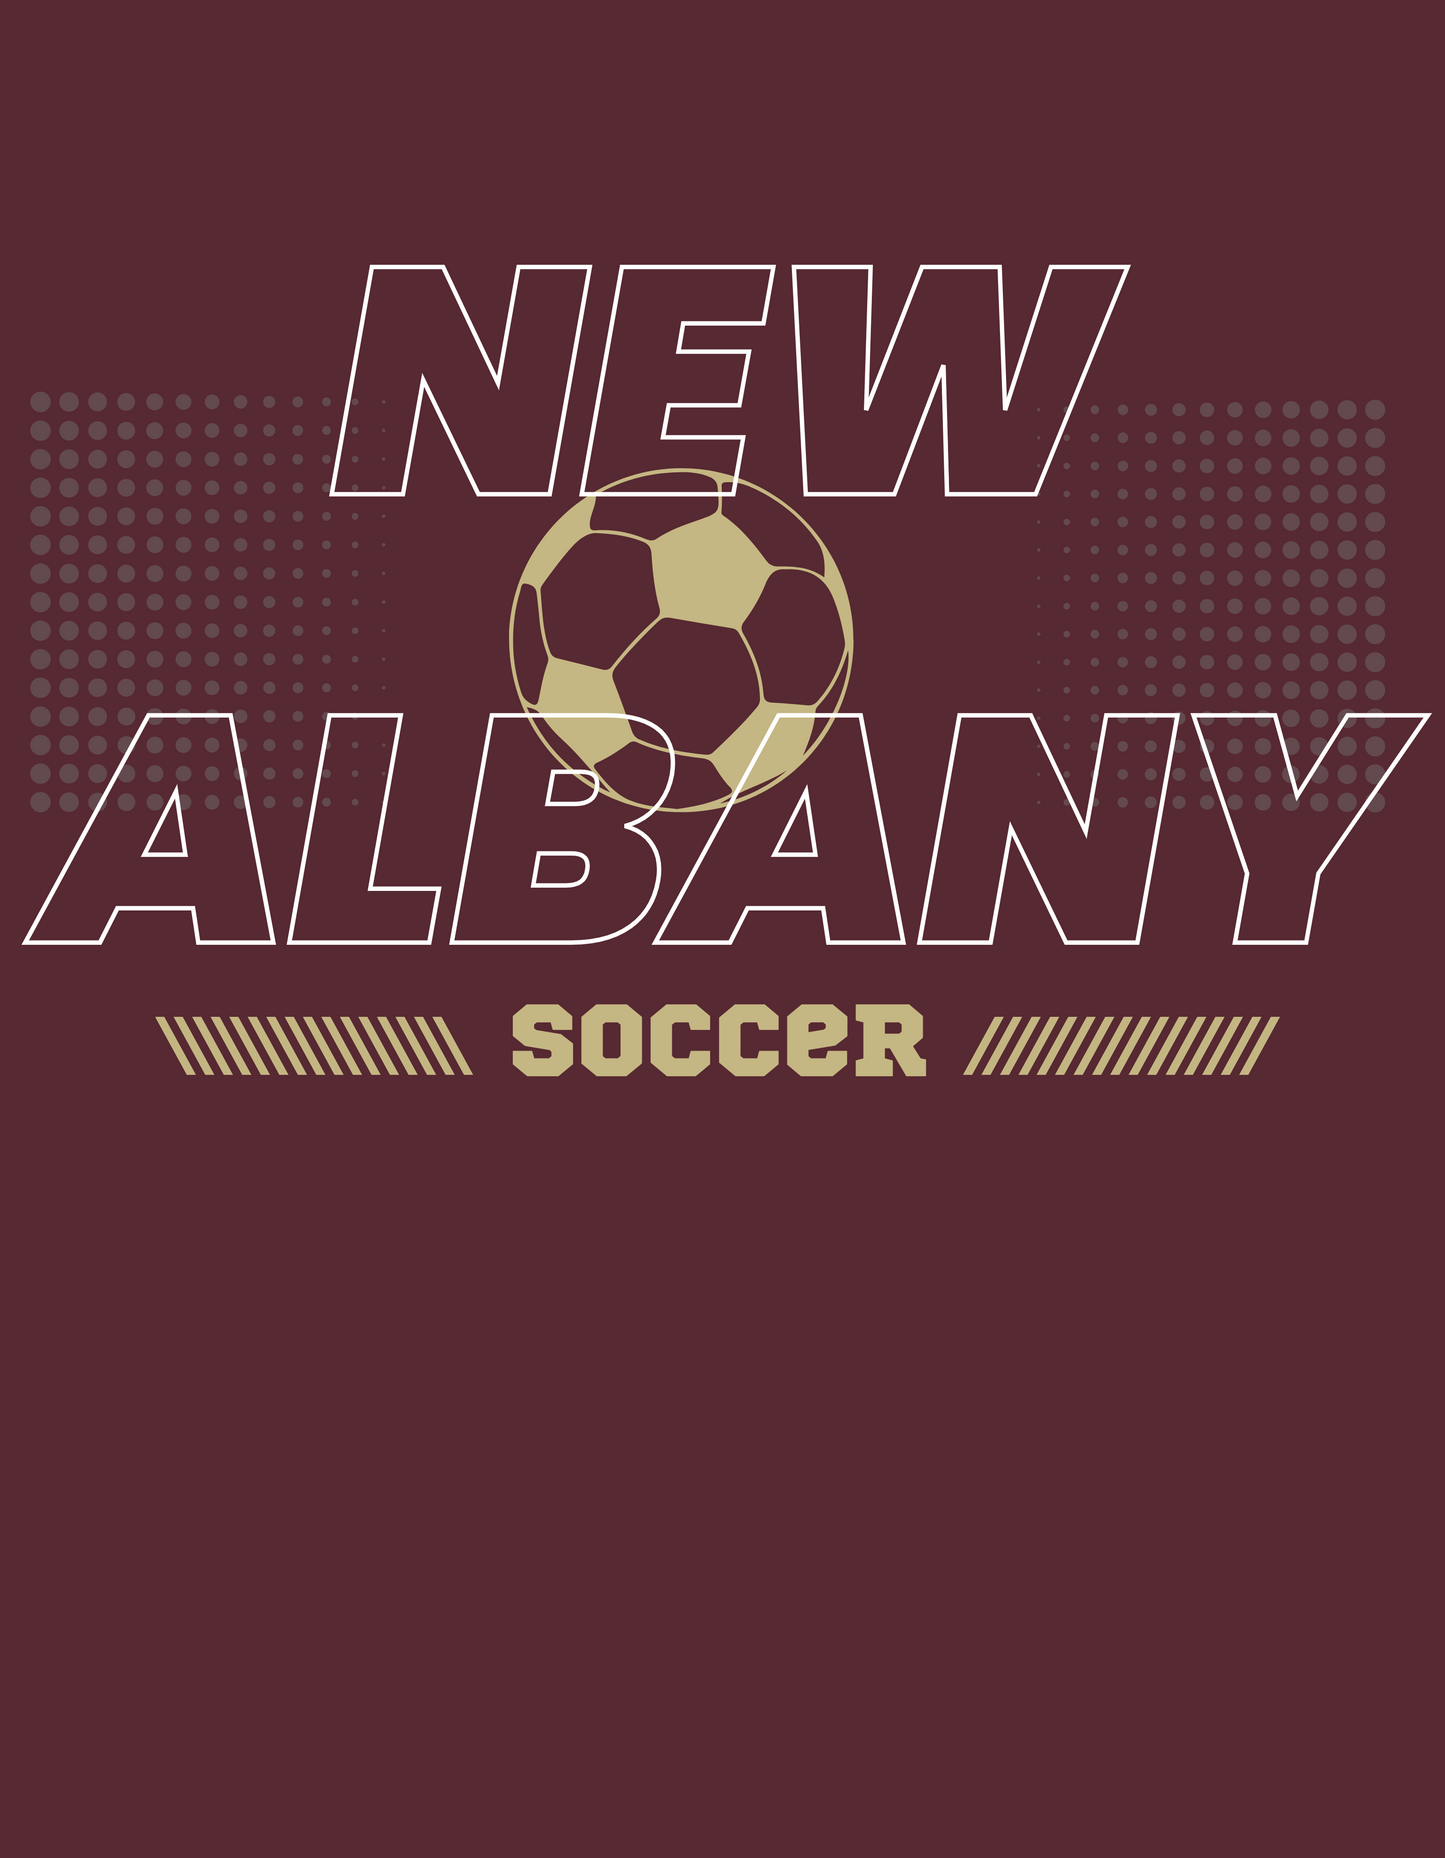 Women’s Essential Dri-Power Soccer Short Sleeve Graphic Tee - New Albany Eagles